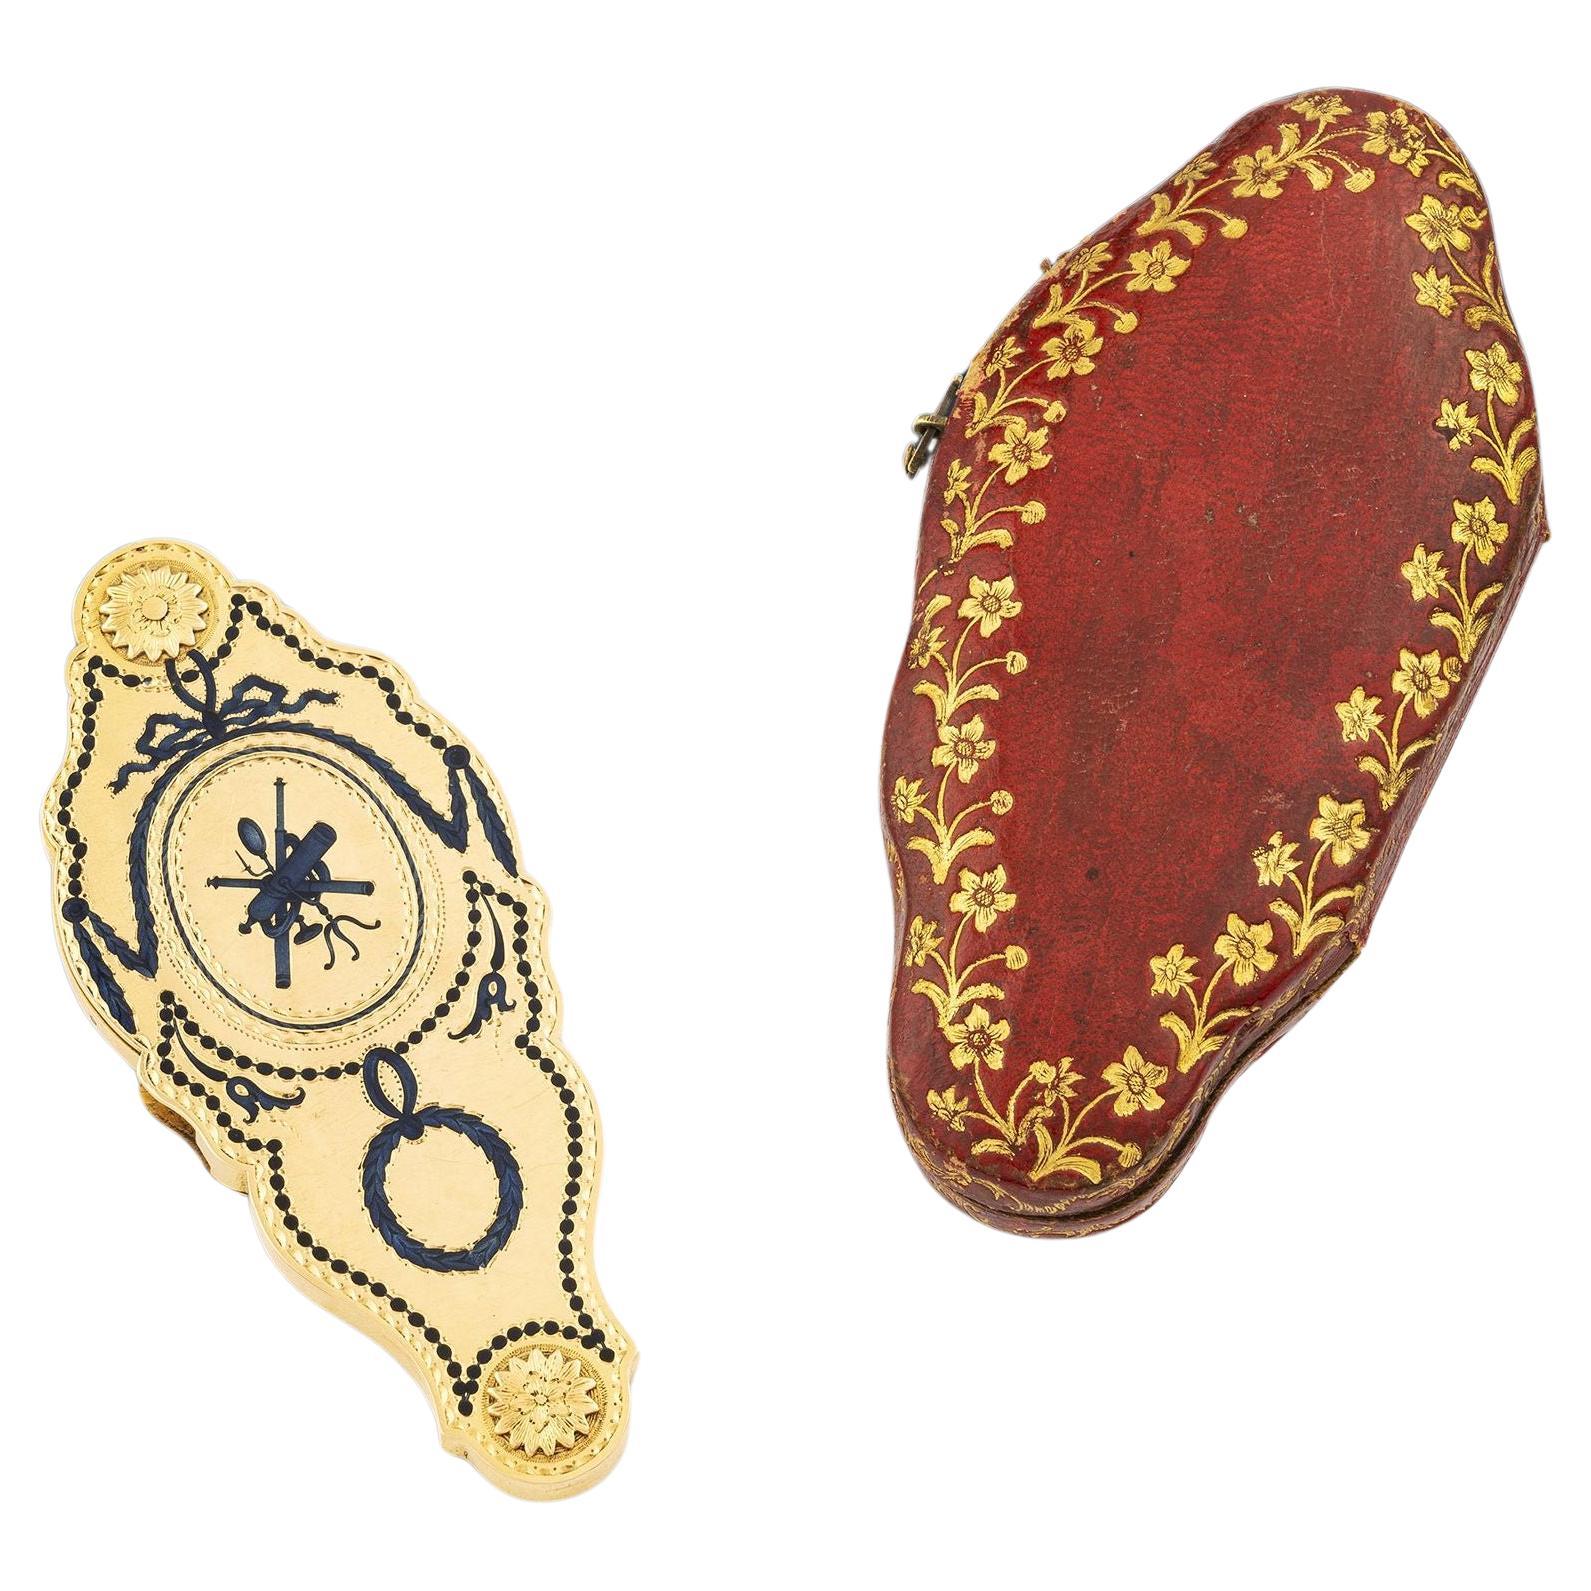 George III Gold & Enamel Magnifying Glass with Red Leather Case, circa 1770 For Sale